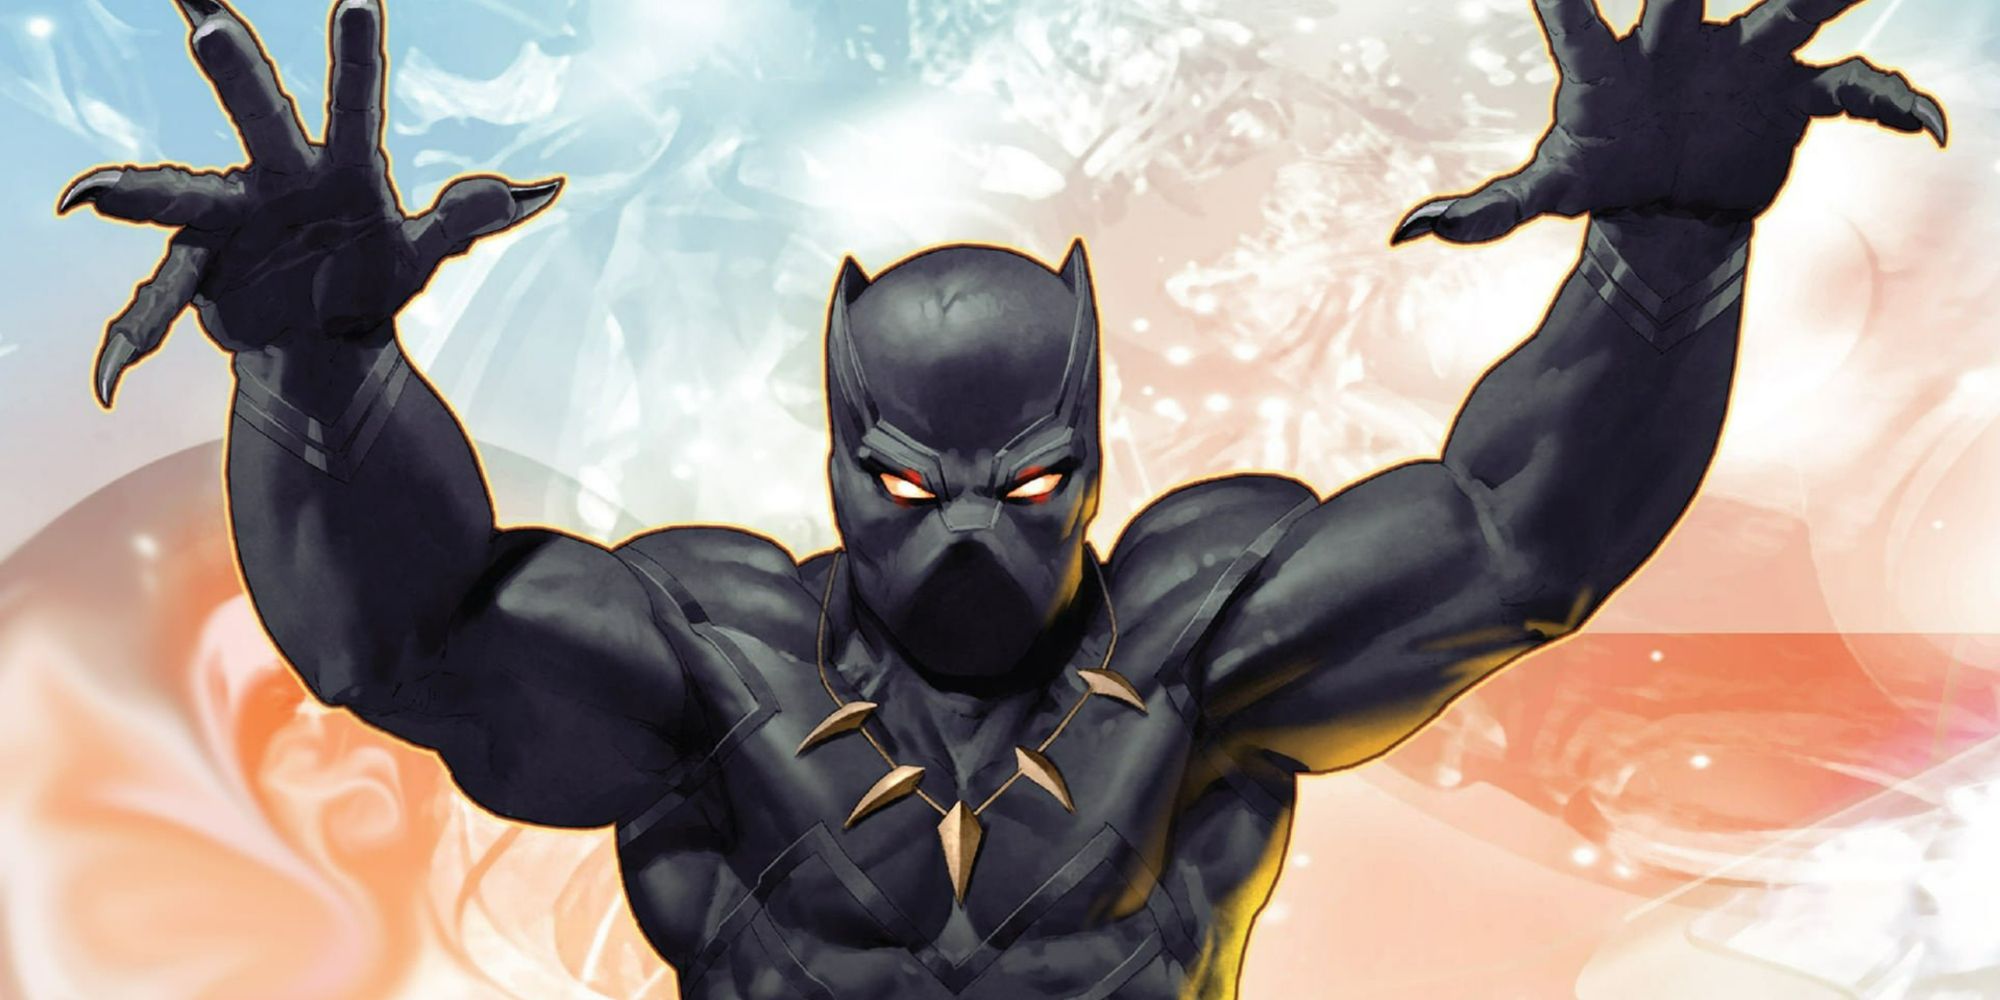 Marvel Comics' Black Panther, claws extended